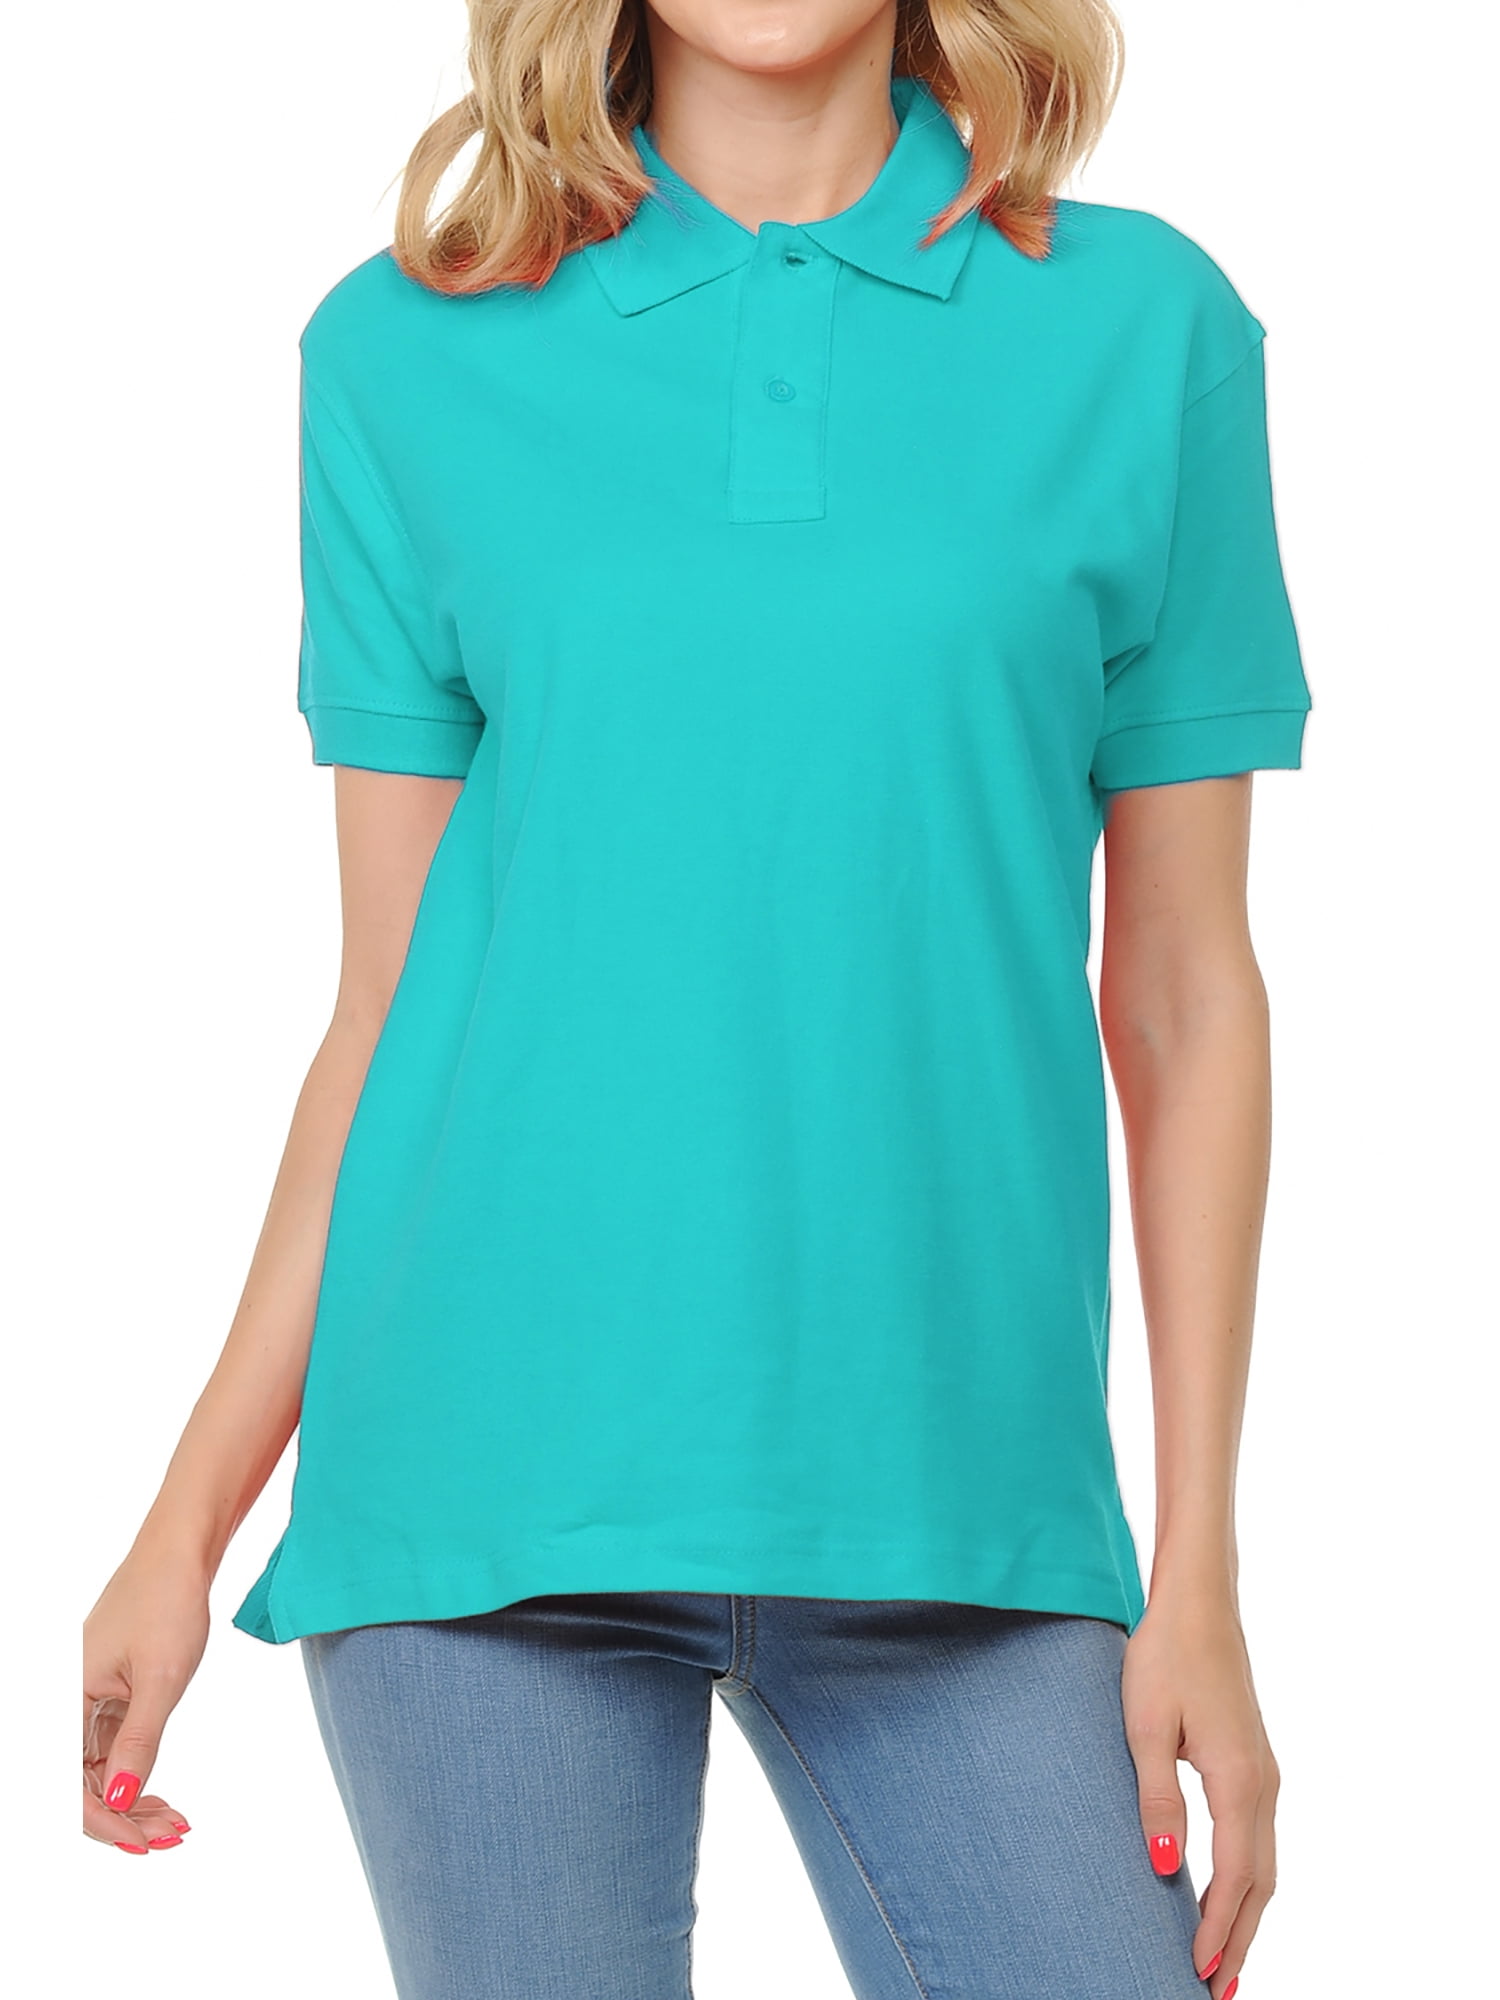 Basico (Turquoise) Polo Collared Shirts For Women 100% Cotton Short ...